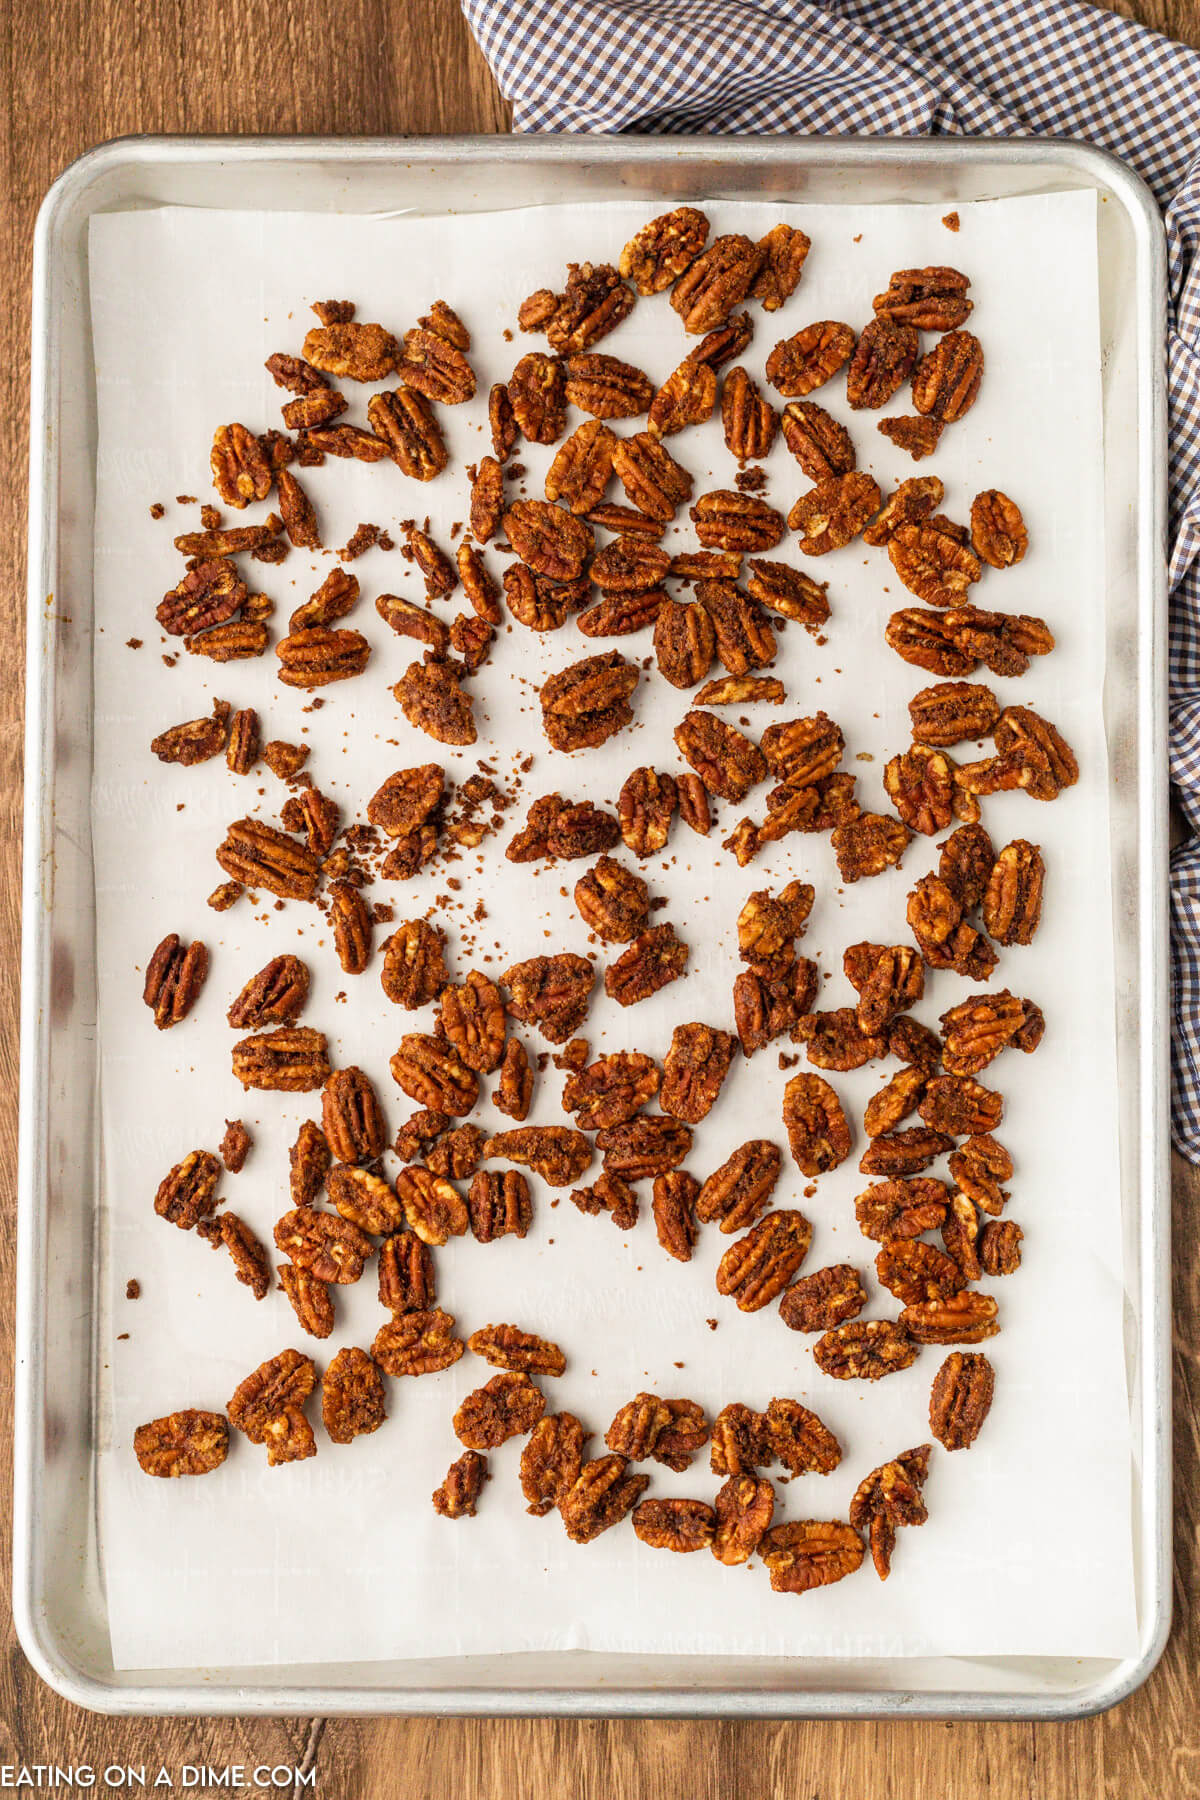 Spreading candied pecans on the baking sheet